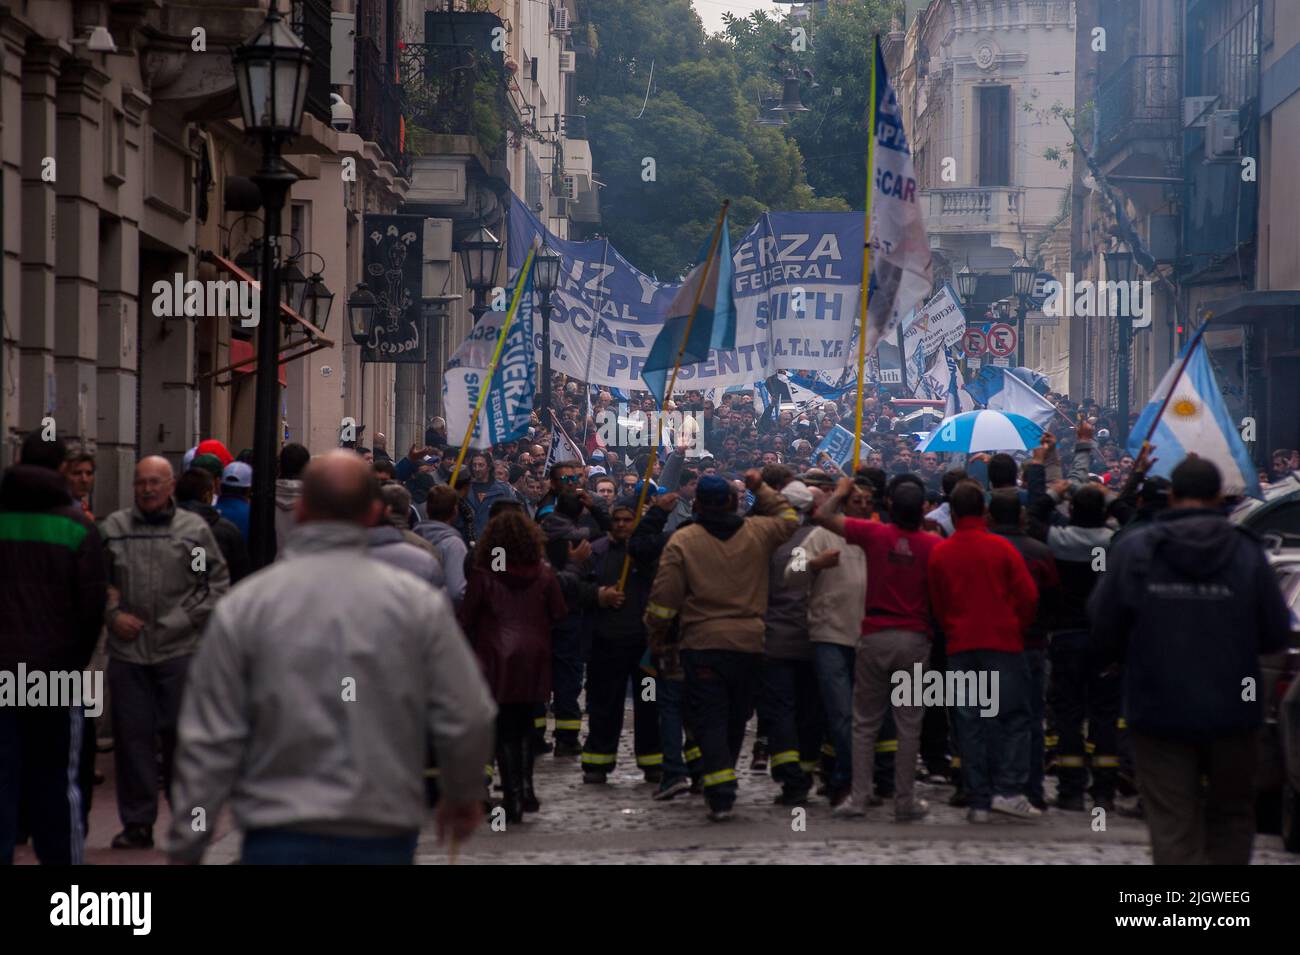 The Hispanic demonstrators with posters walking during the Workers' Day Rally in Buenos Aires, Argentina Stock Photo